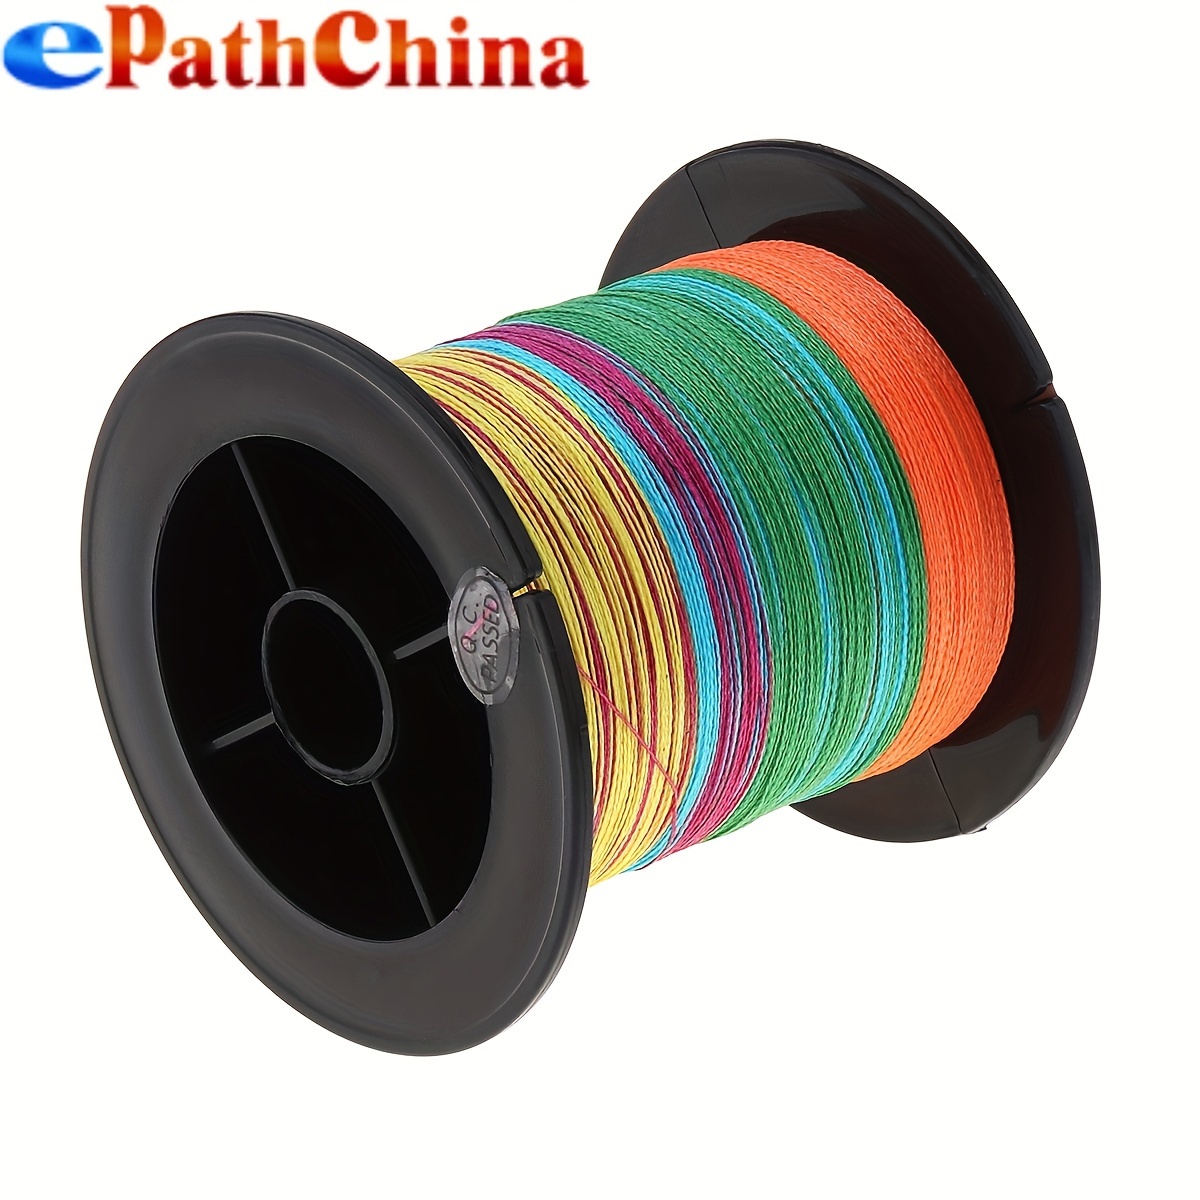 FTK Color Braided Fishing Line - Strong and Durable 4-Strand Multifilament  PE Line for Freshwater and Saltwater Fishing - Available in 8-90LB Test Str